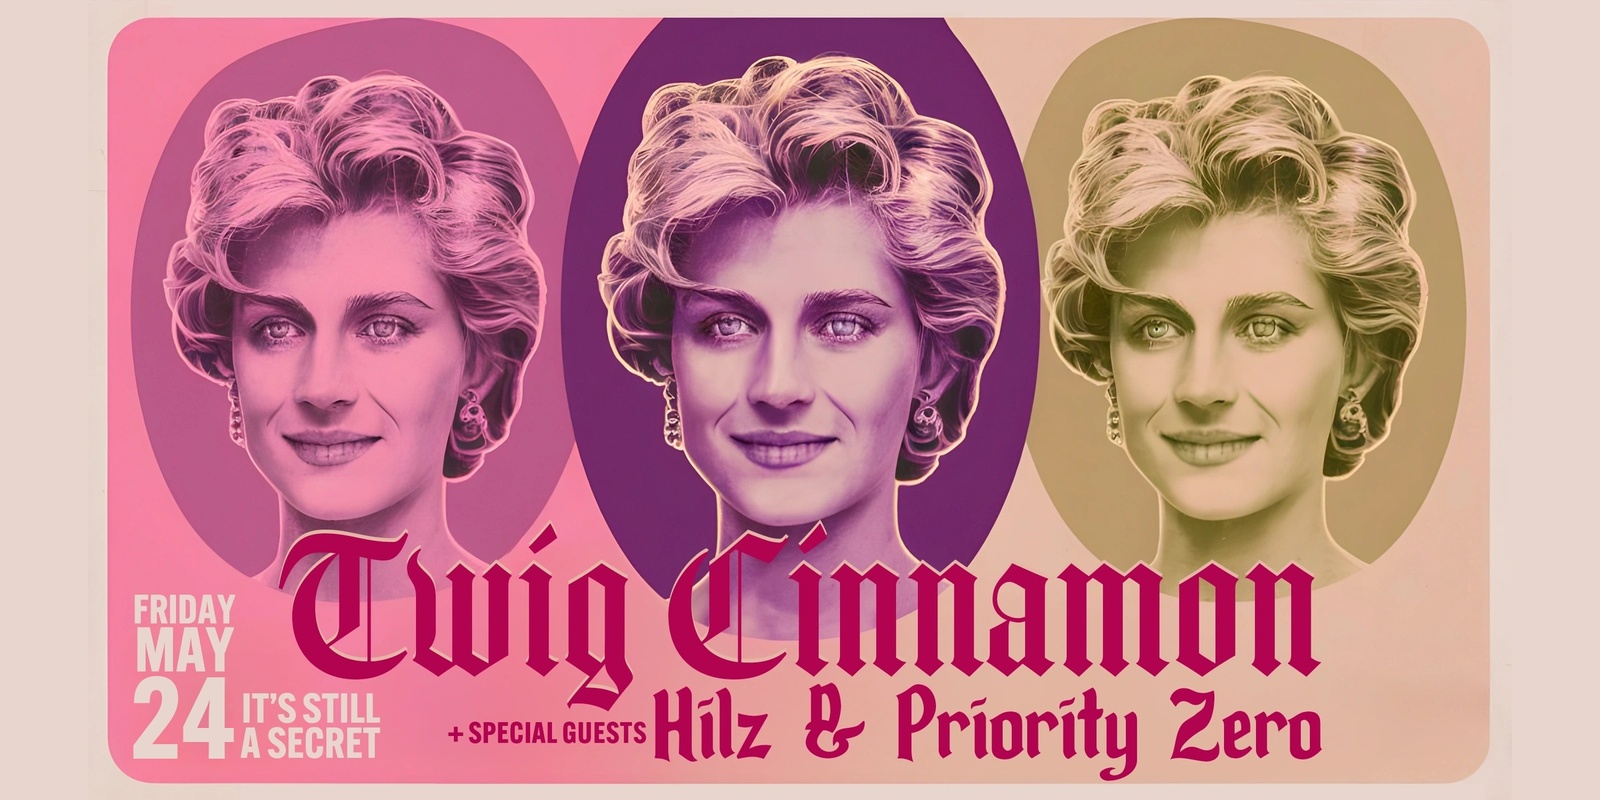 Banner image for TWIG CINNAMON LIVE + Special Guests 